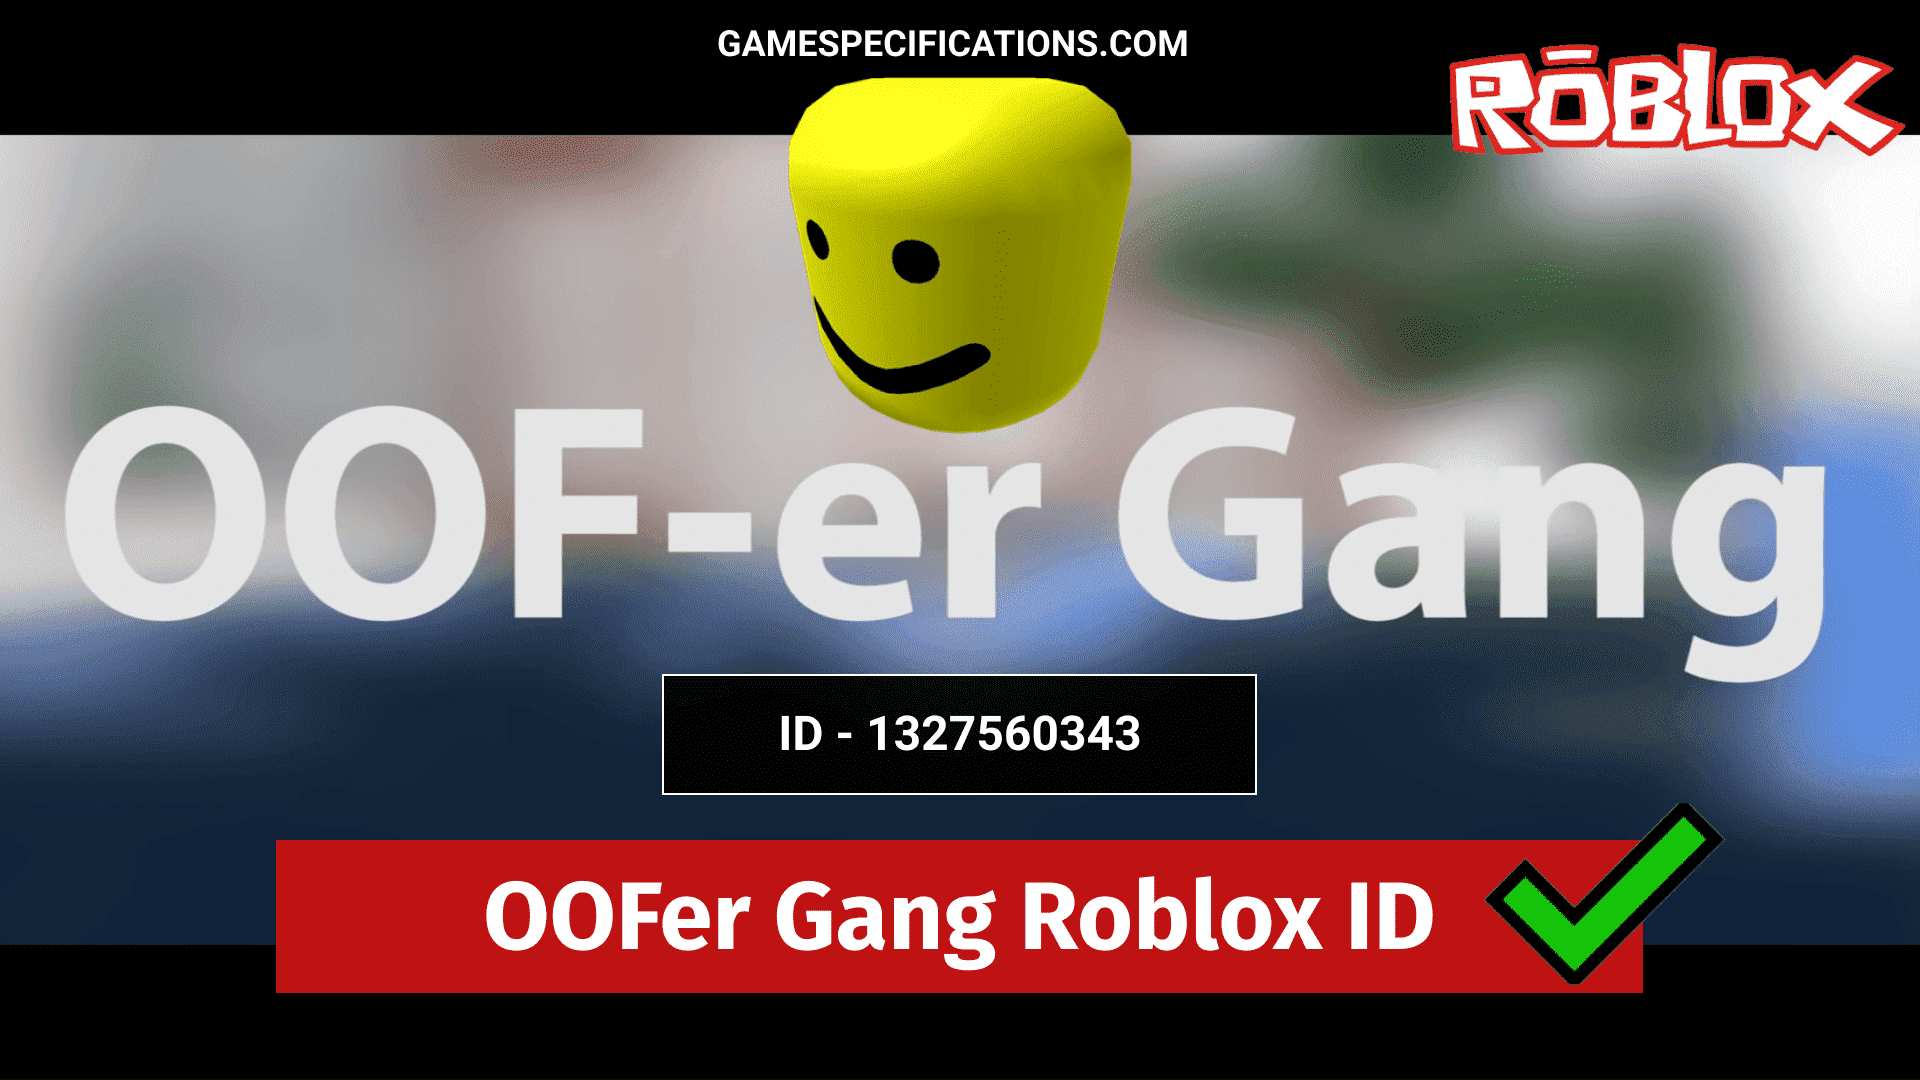 Oofer Gang Roblox Id Codes 2021 Game Specifications - gucci gang roblox code